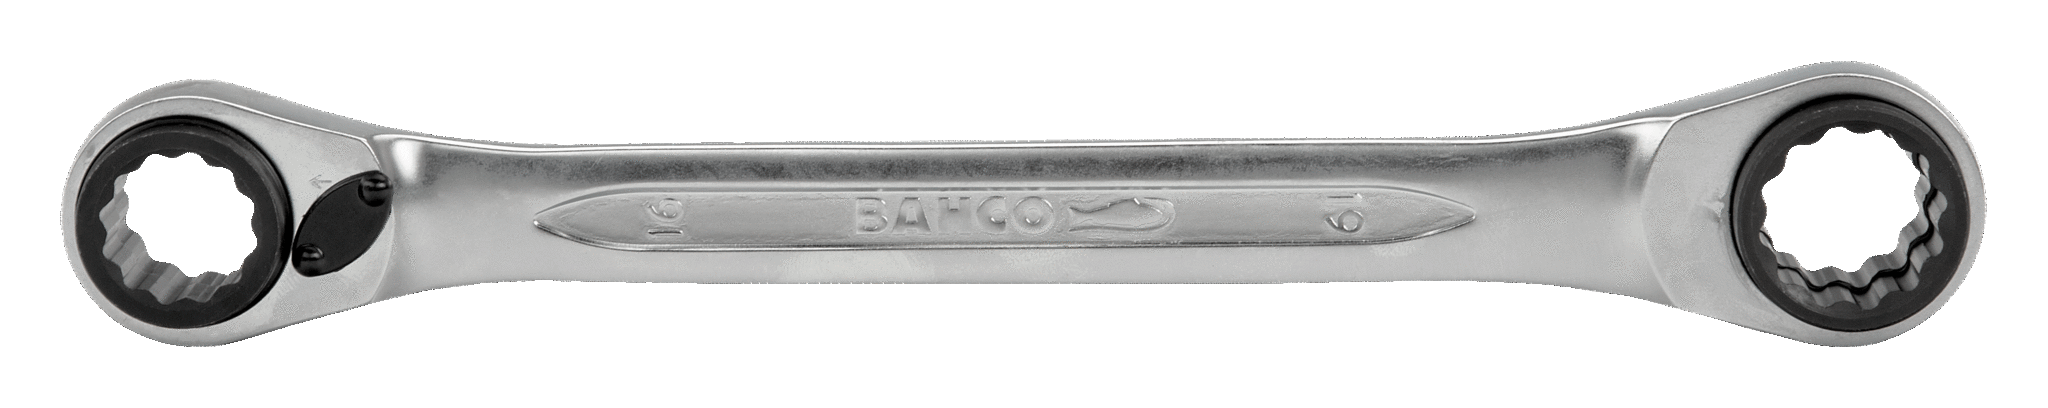 4-in-1 Ratcheting Ring Wrenches with Chrome Finish - S4RM-21-27 by Bahco